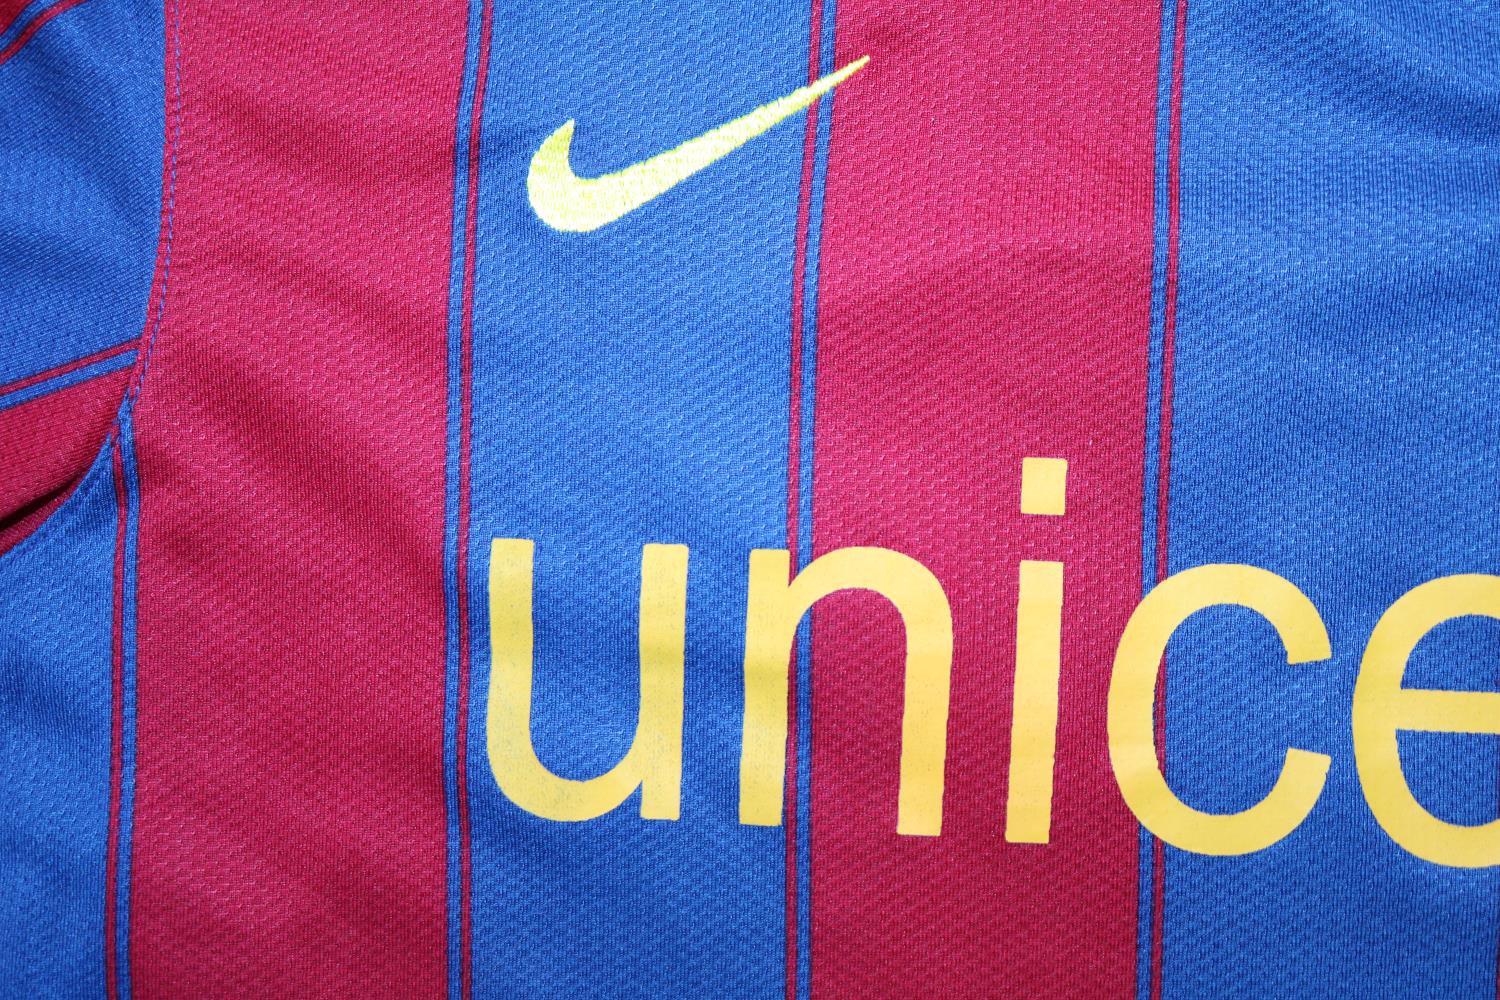 LIONEL MESSI 2009/2010 SIGNED BARCELONA #10 JERSEY The jersey is accompanied by a letter of - Image 5 of 10